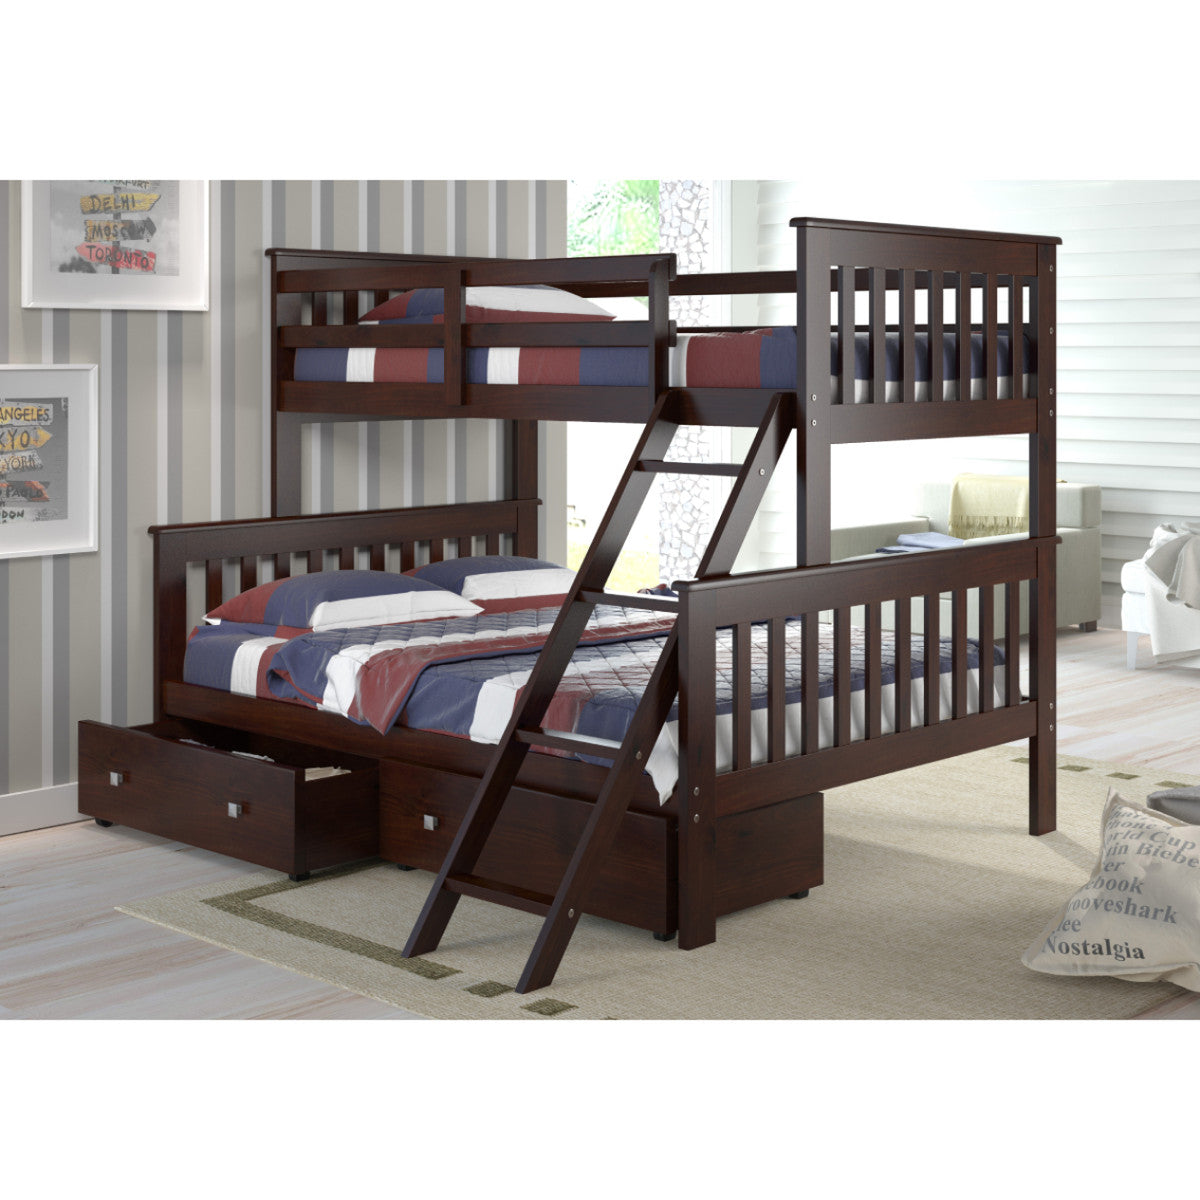 TWIN/FULL MISSION BUNK BED WITH DUAL UNDERBED DRAWERS DARK CAPPUCCINO FINISH